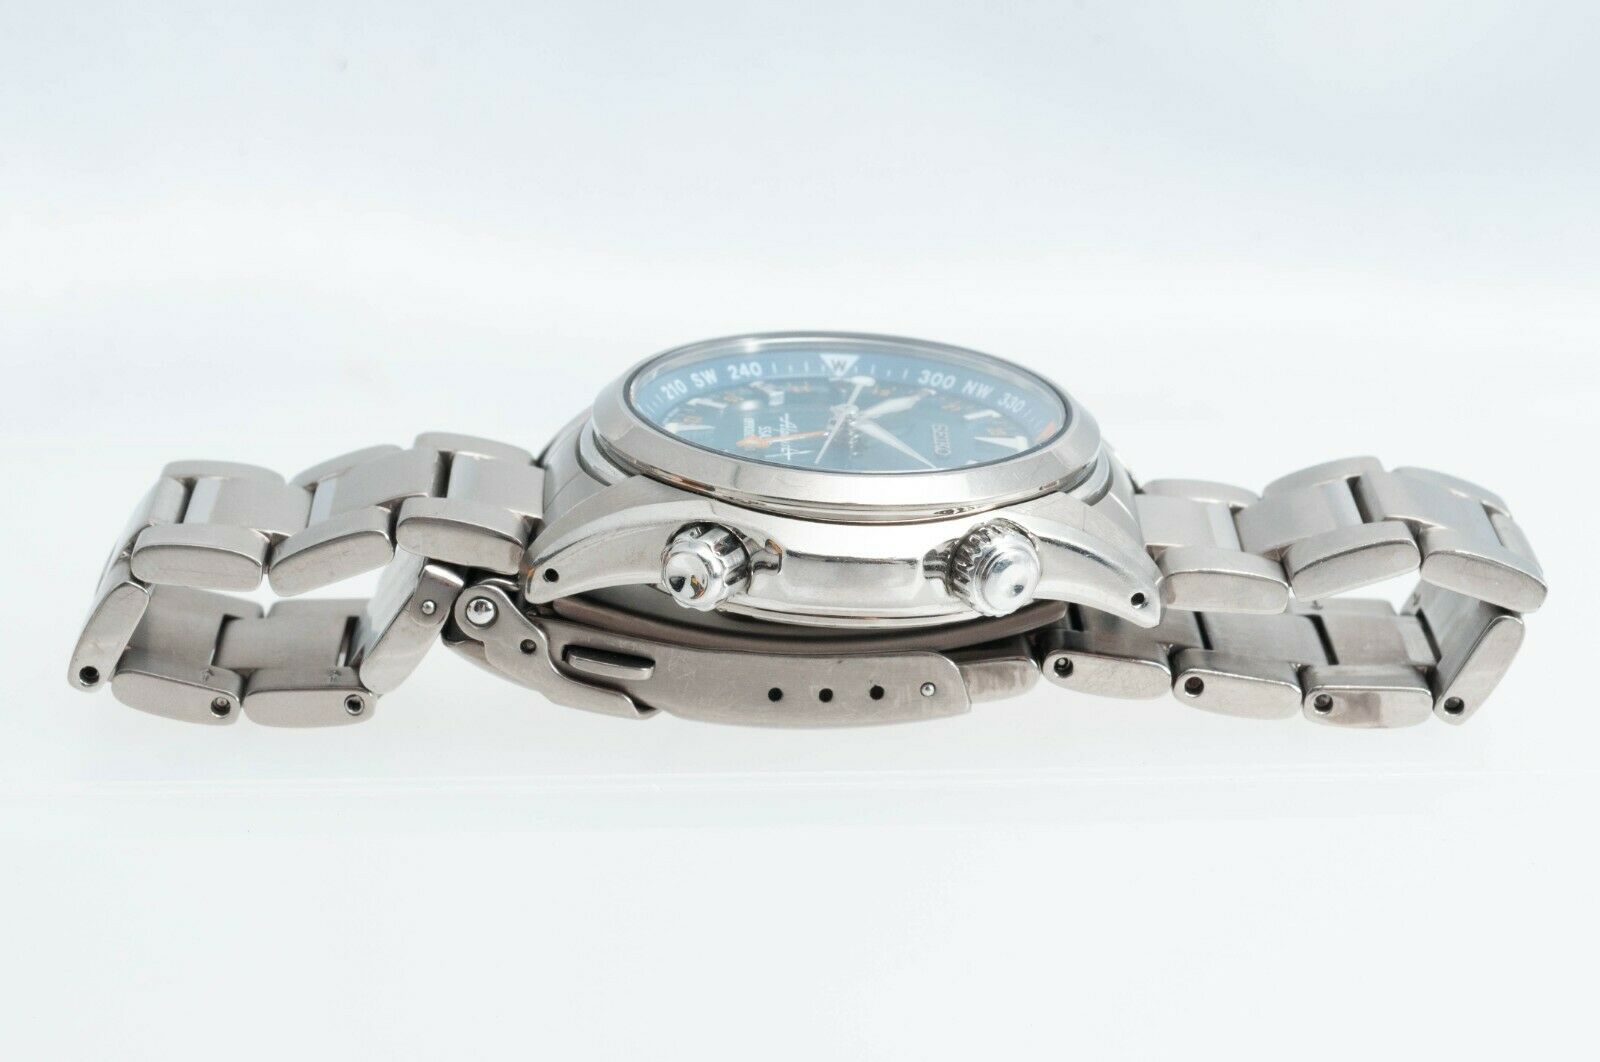 Seiko Alpinist SSASS Limited Edition Prospex (500 Pieces) SBCJ023  (8f56-00D0) Owners Club